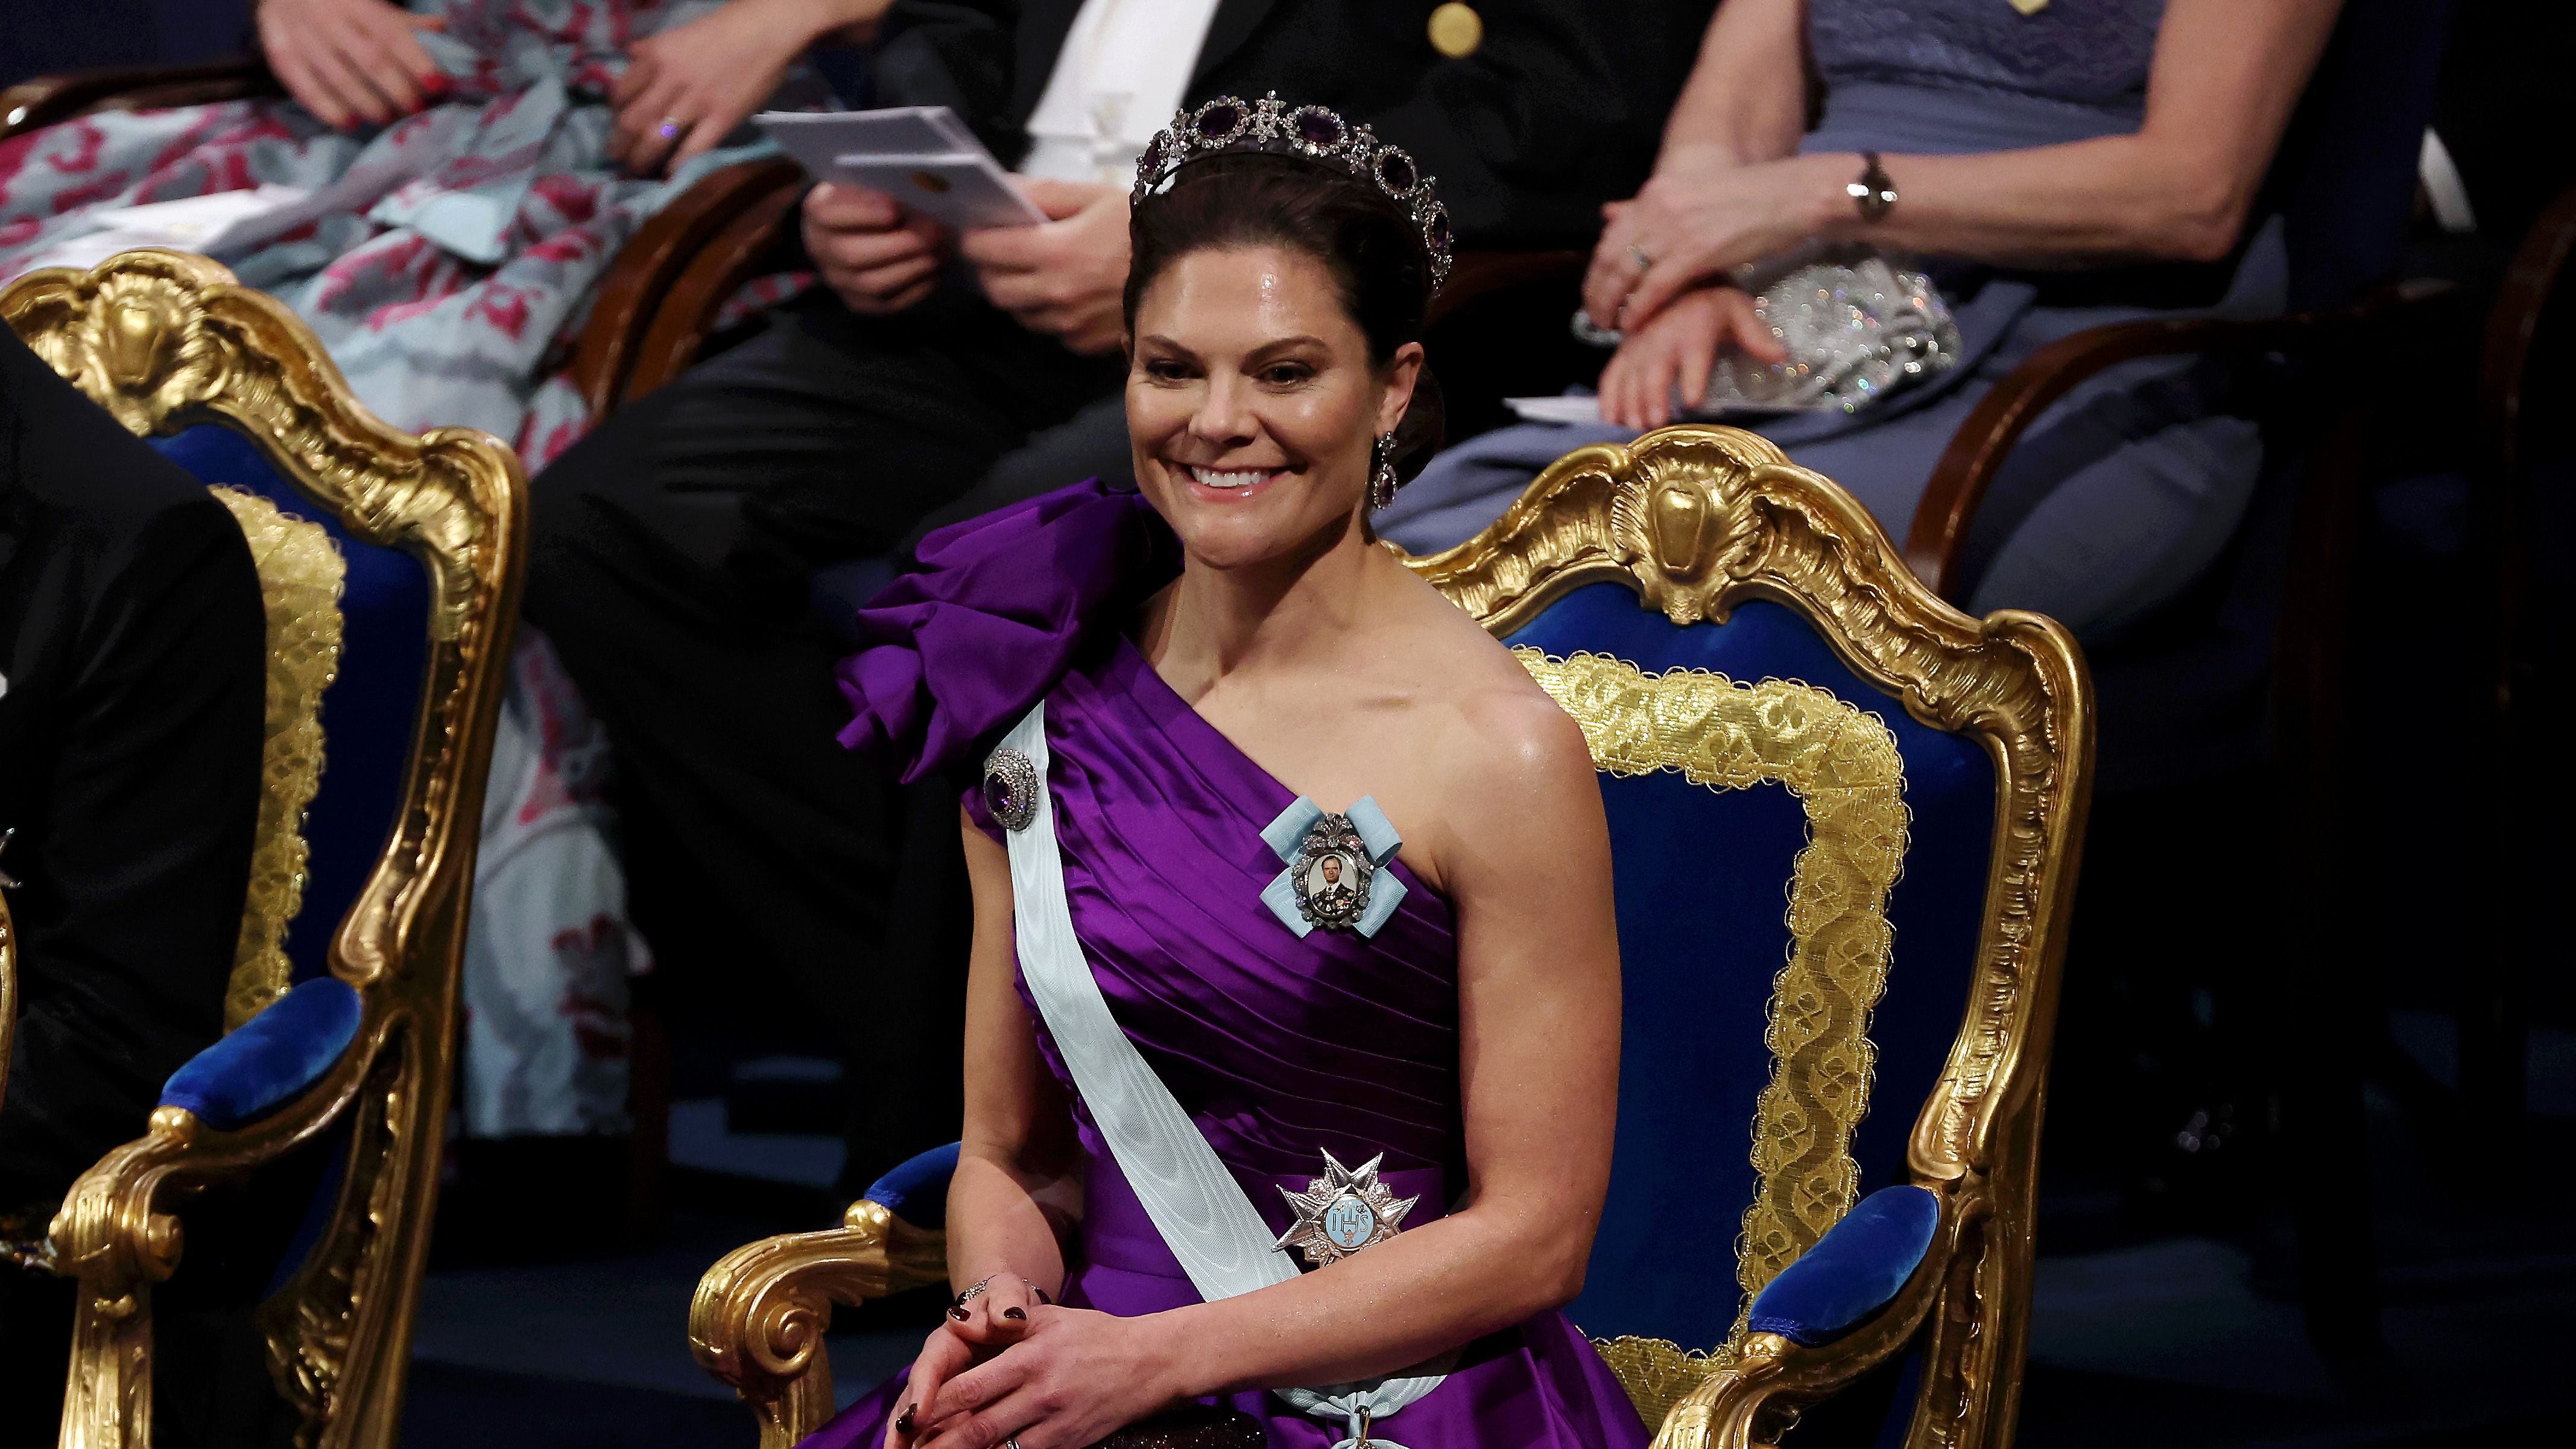 The best photos of the swedish royal familys tiaras at the nobel prize ceremony